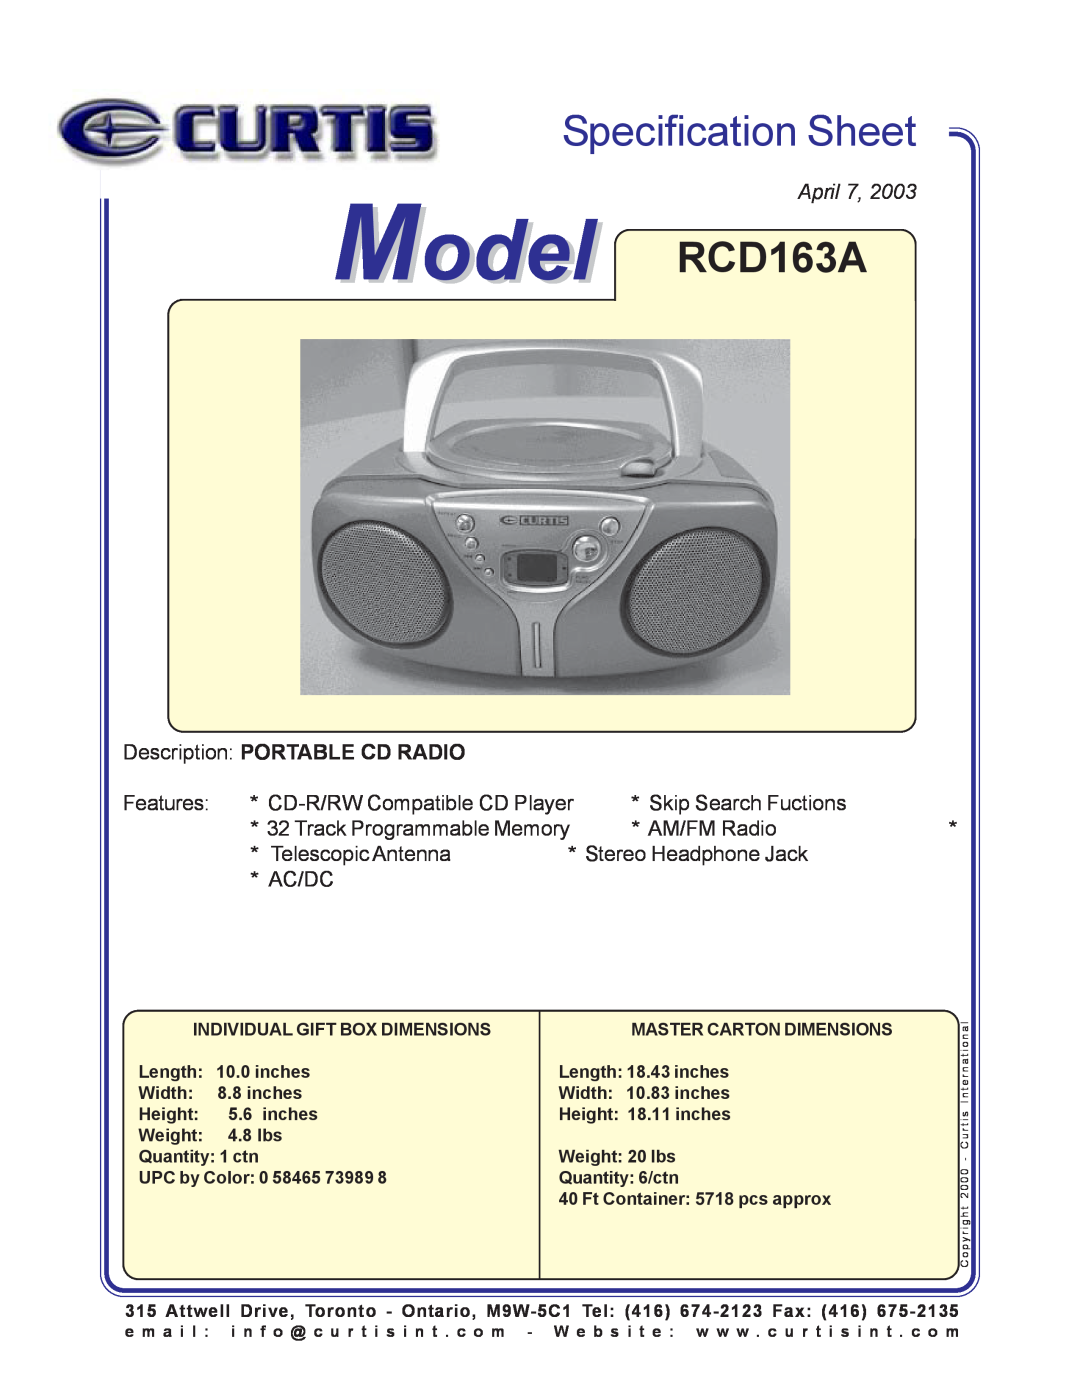 Curtis specifications Specification Sheet, Model RCD163A, April 7, Place Image Here, Description PORTABLE CD RADIO 